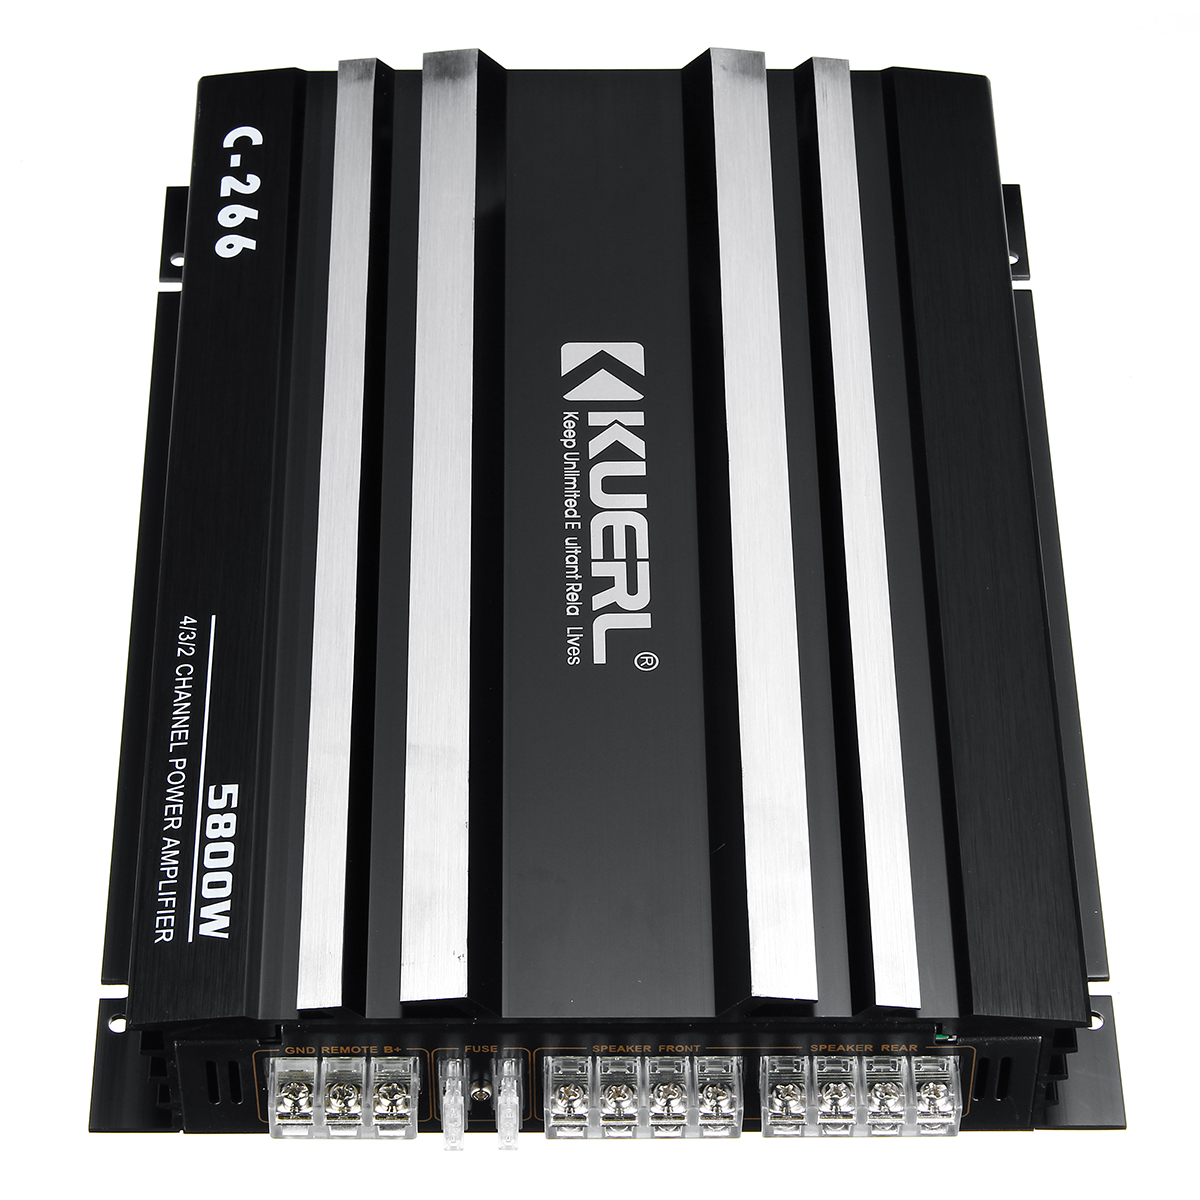 DC-12V-5800W-4-Channel-Bass-Power-Amplifier-Nondestructive-Support-4-Speakers-1420127-9